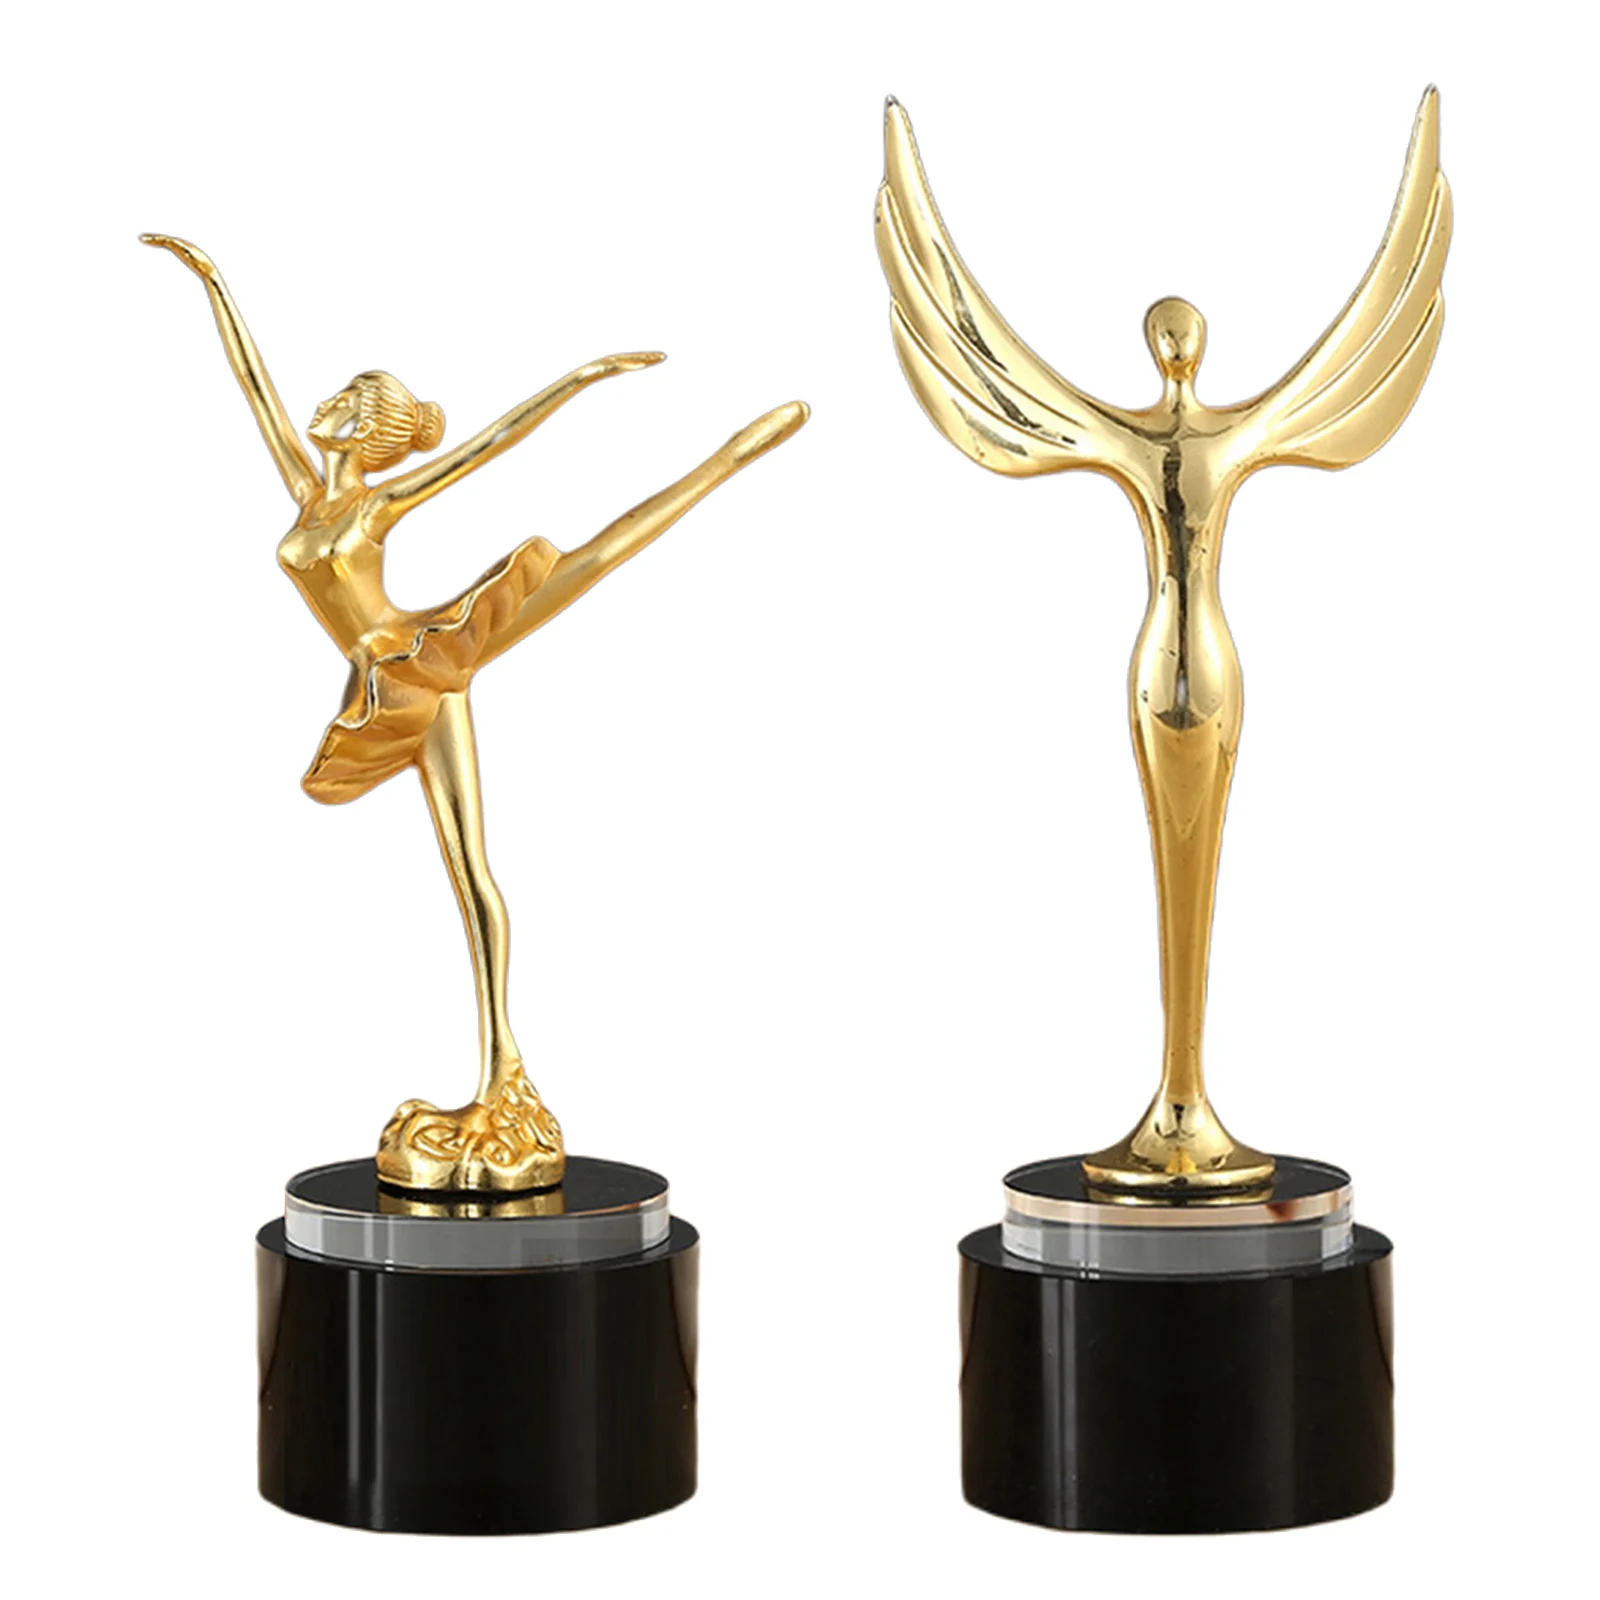 Gold Award Trophies Party Favors for Award Ceremony,Theme Party,Movie Night,Classroom Prize,Office Competition,for Teens Adults